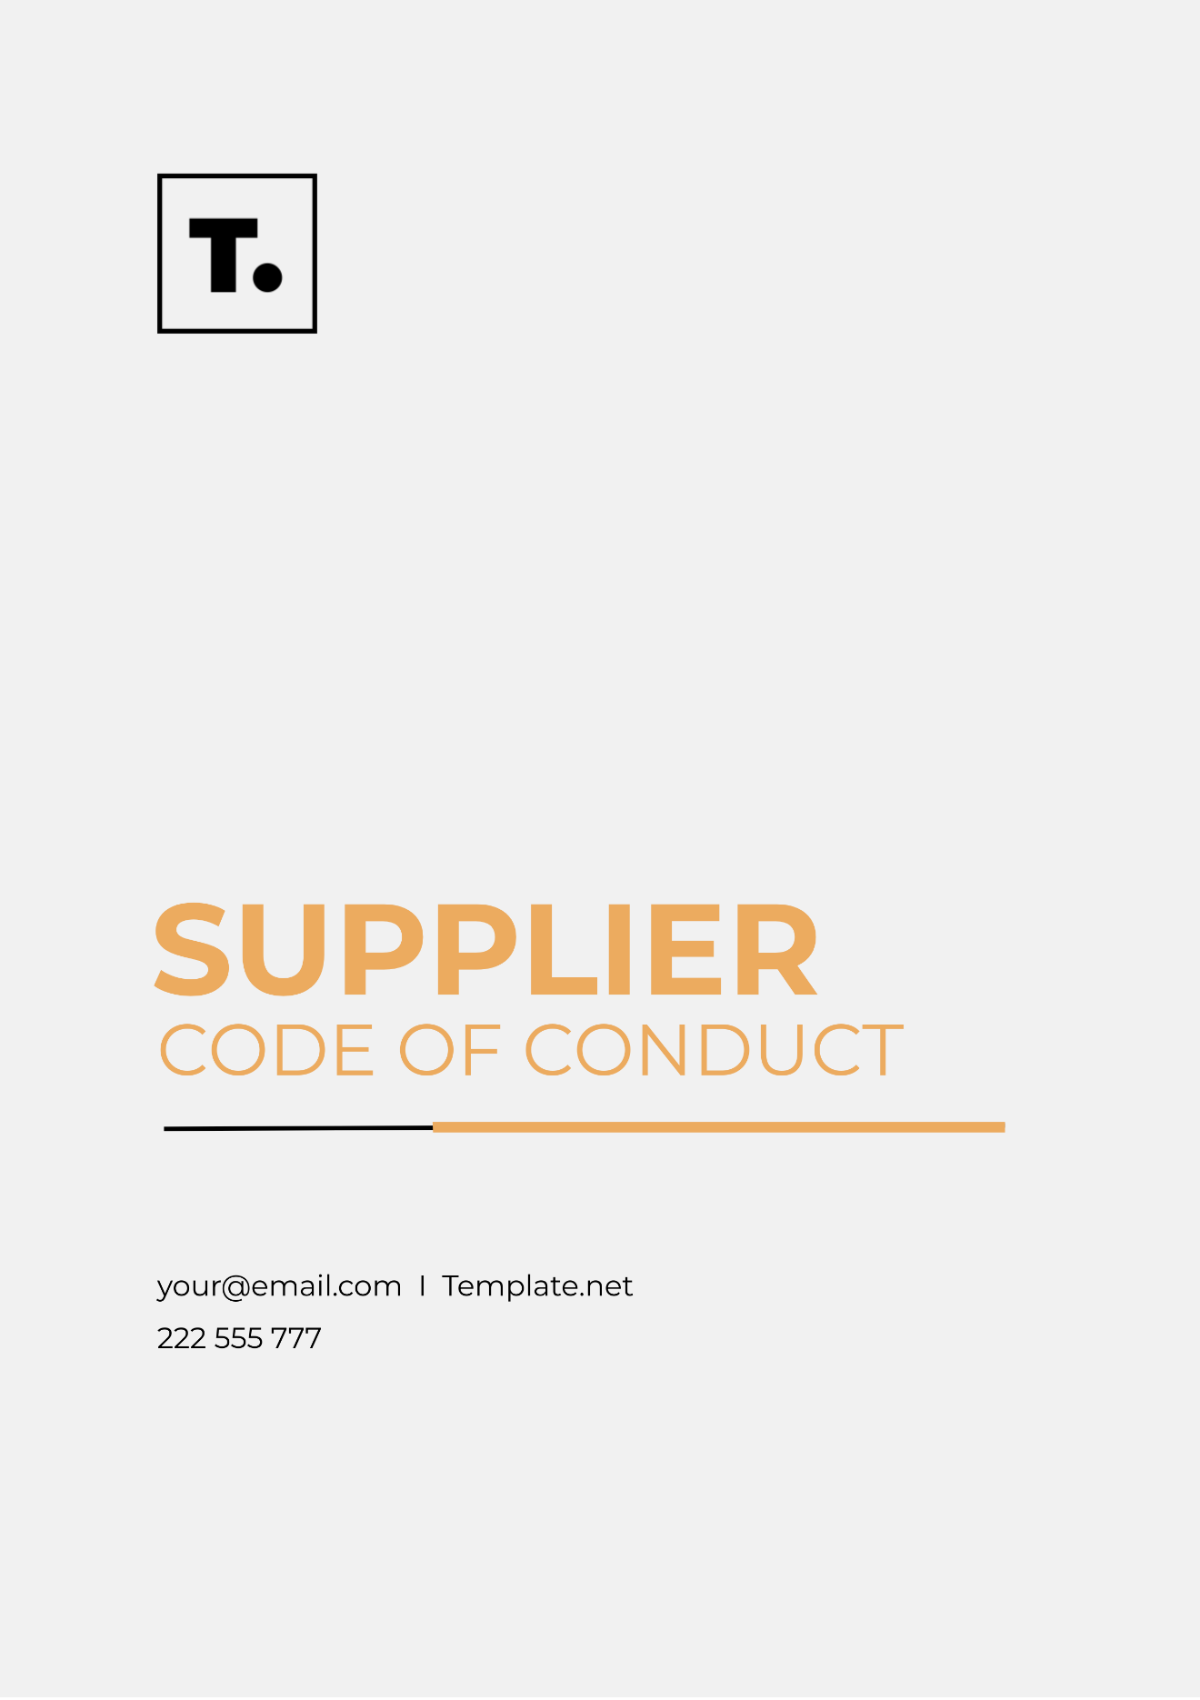 Supplier Code of Conduct Template